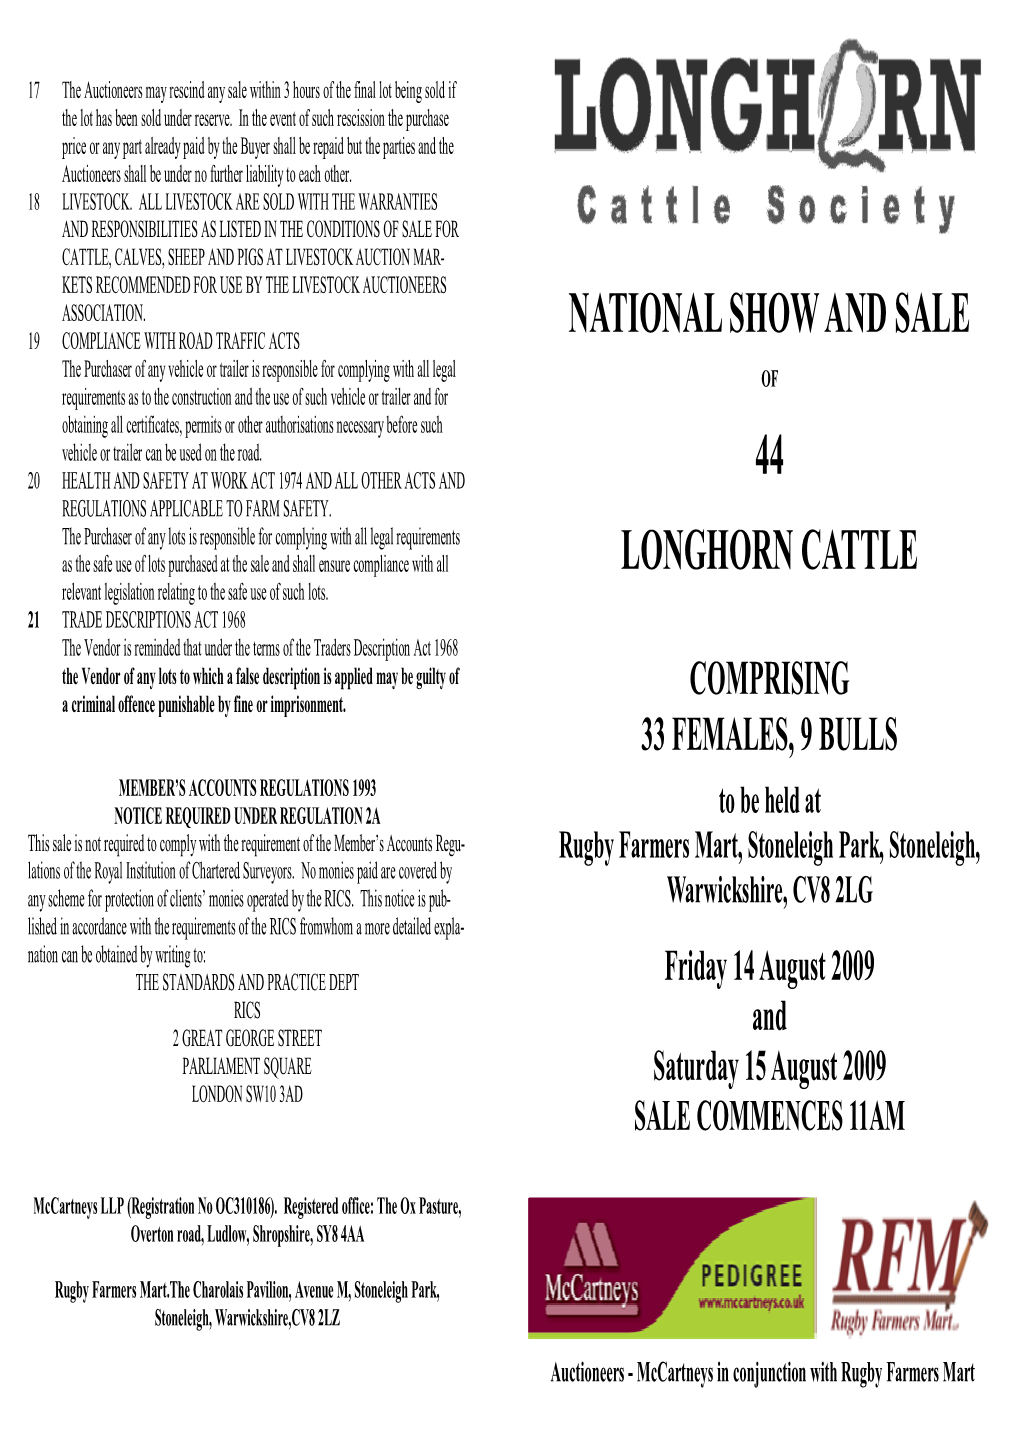 National Show and Sale 44 Longhorn Cattle